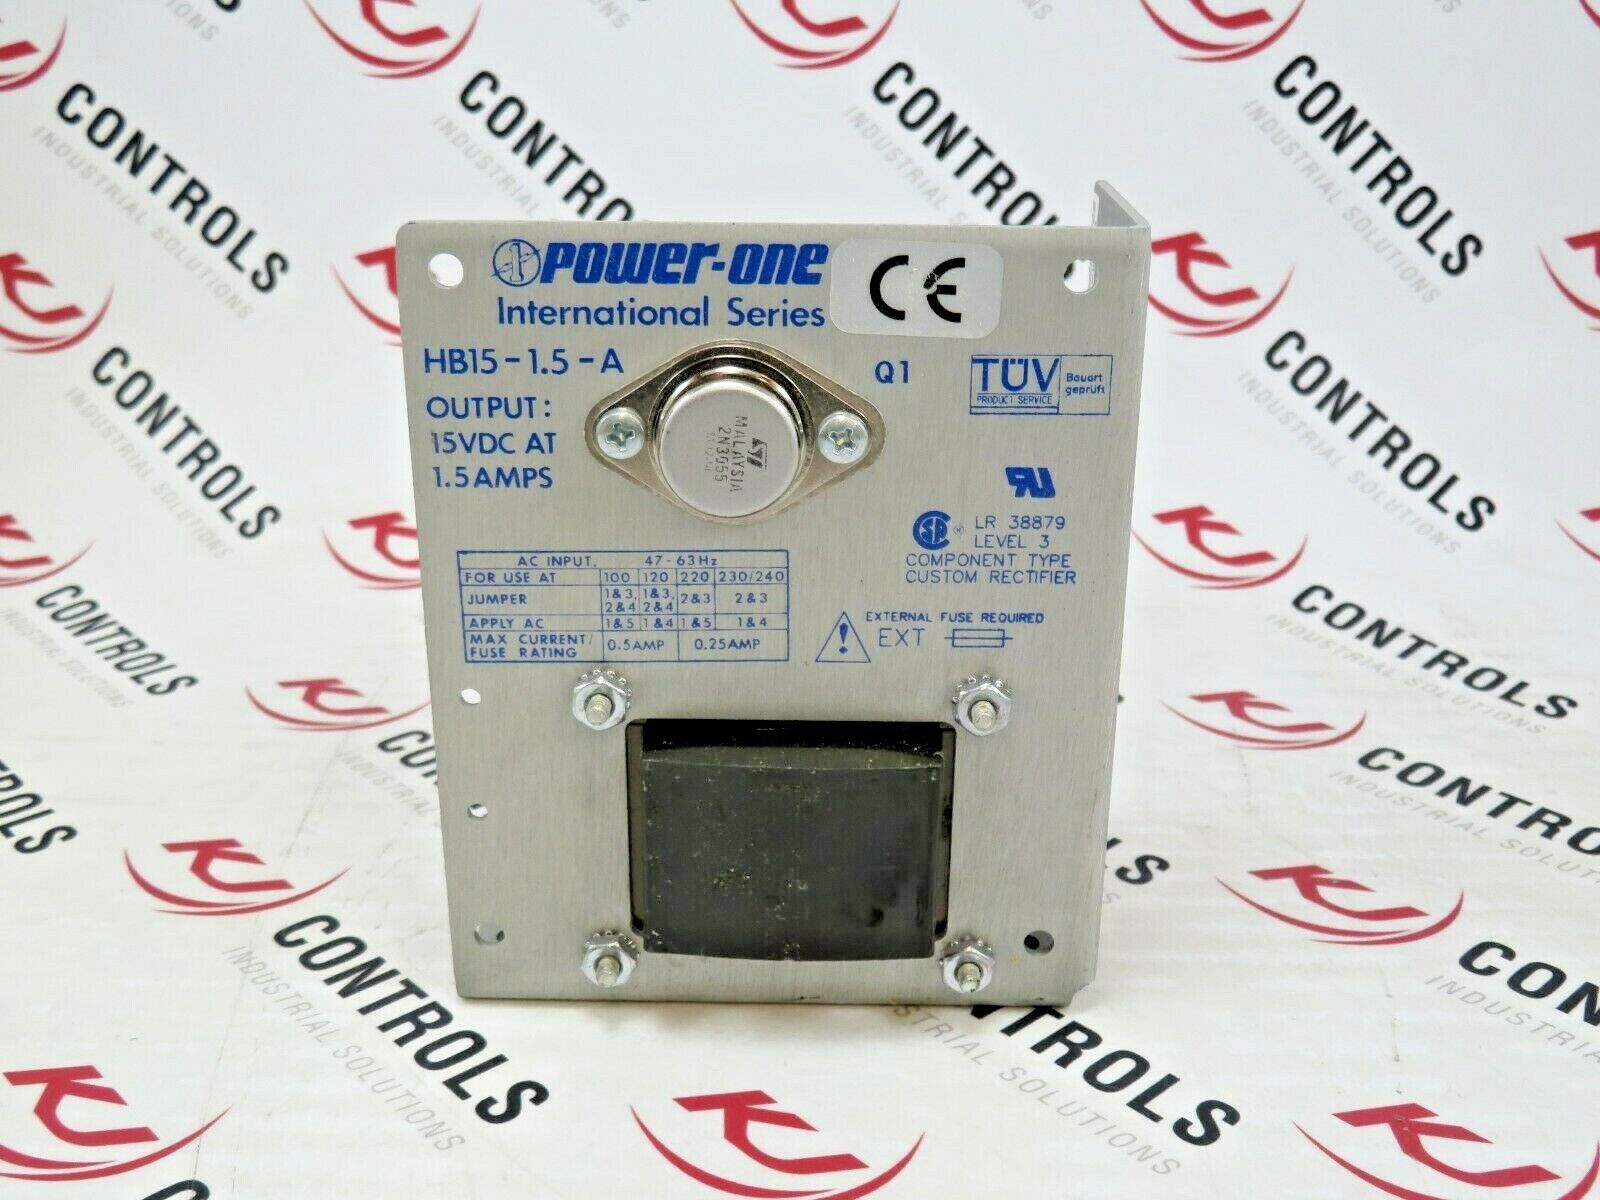 Power One HB15-1.5-A Power Supply 15VDC 1.5A